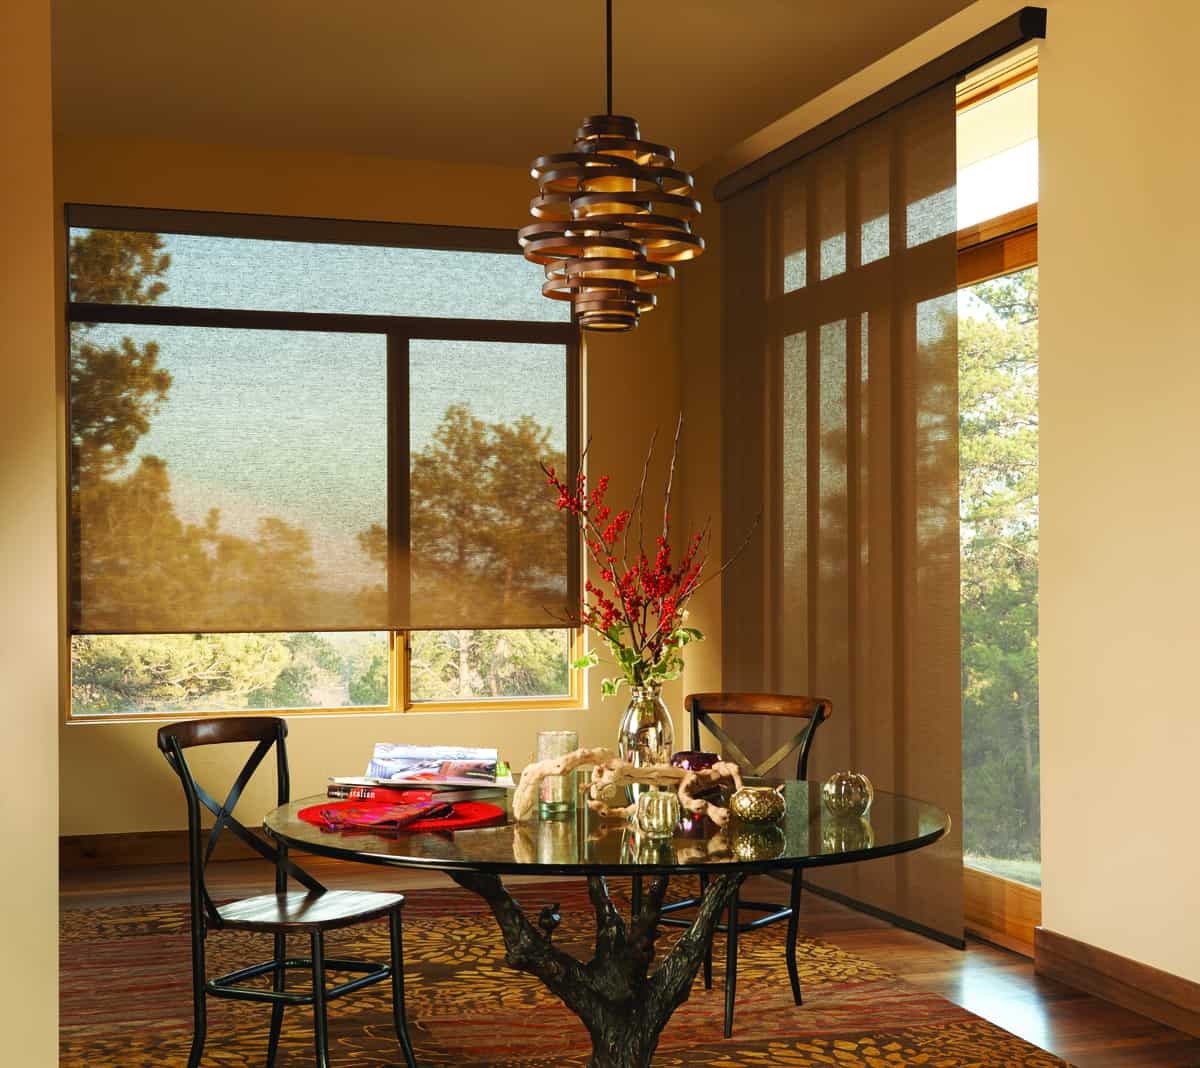 Provenance® Woven Wood Shades Quincy, Illinois (IL) Neutral shades with modern styles and state-of-the-art features.